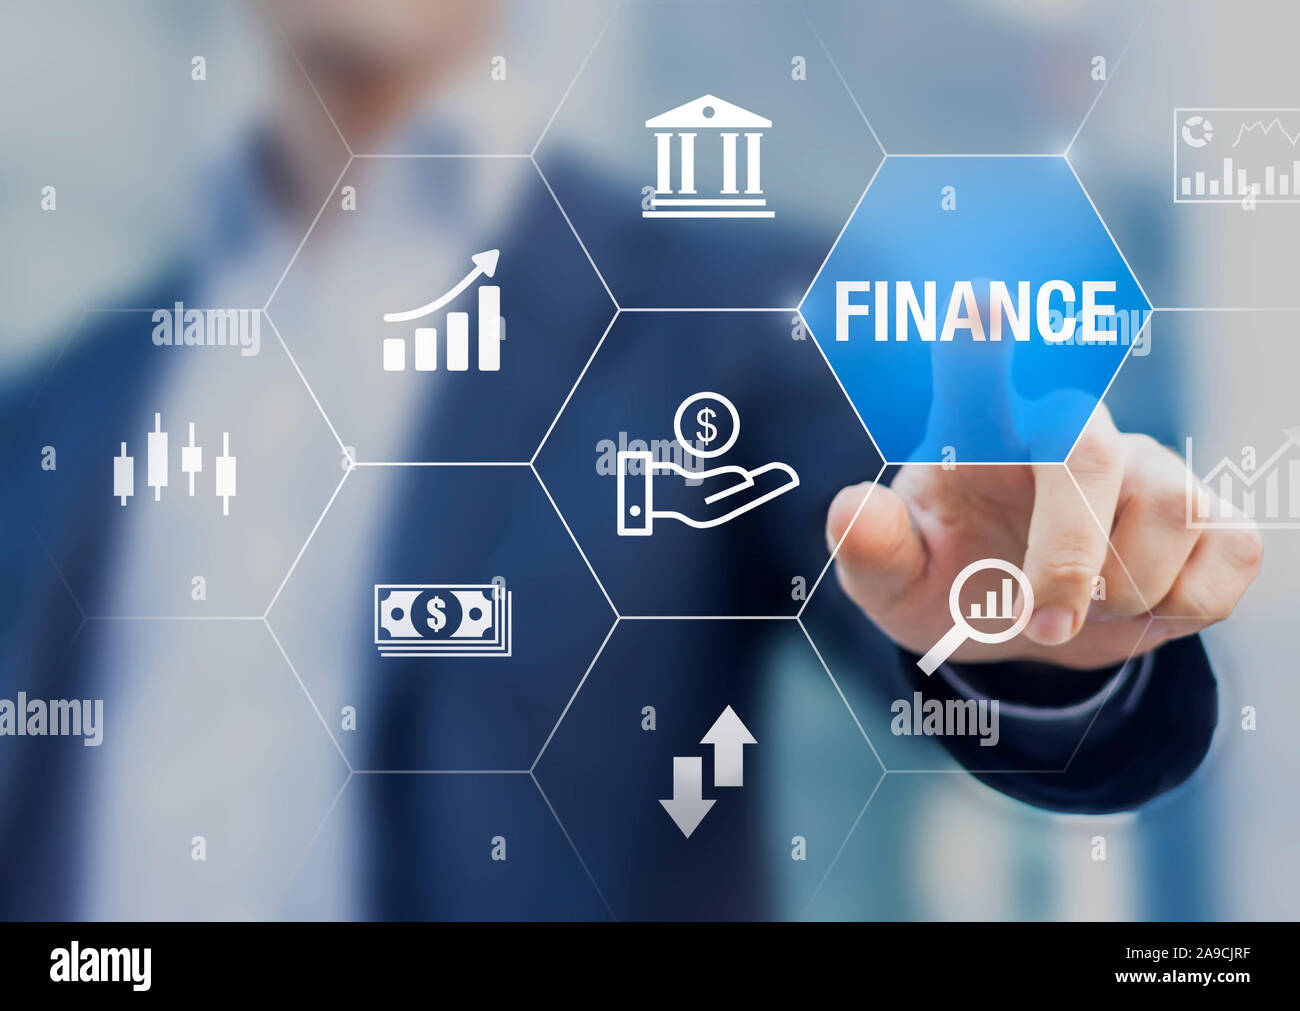 Finance investment and assets management concept with businessman touching icons of stock exchange market, bank, analysis, ROI, money and fintech Stock Photo